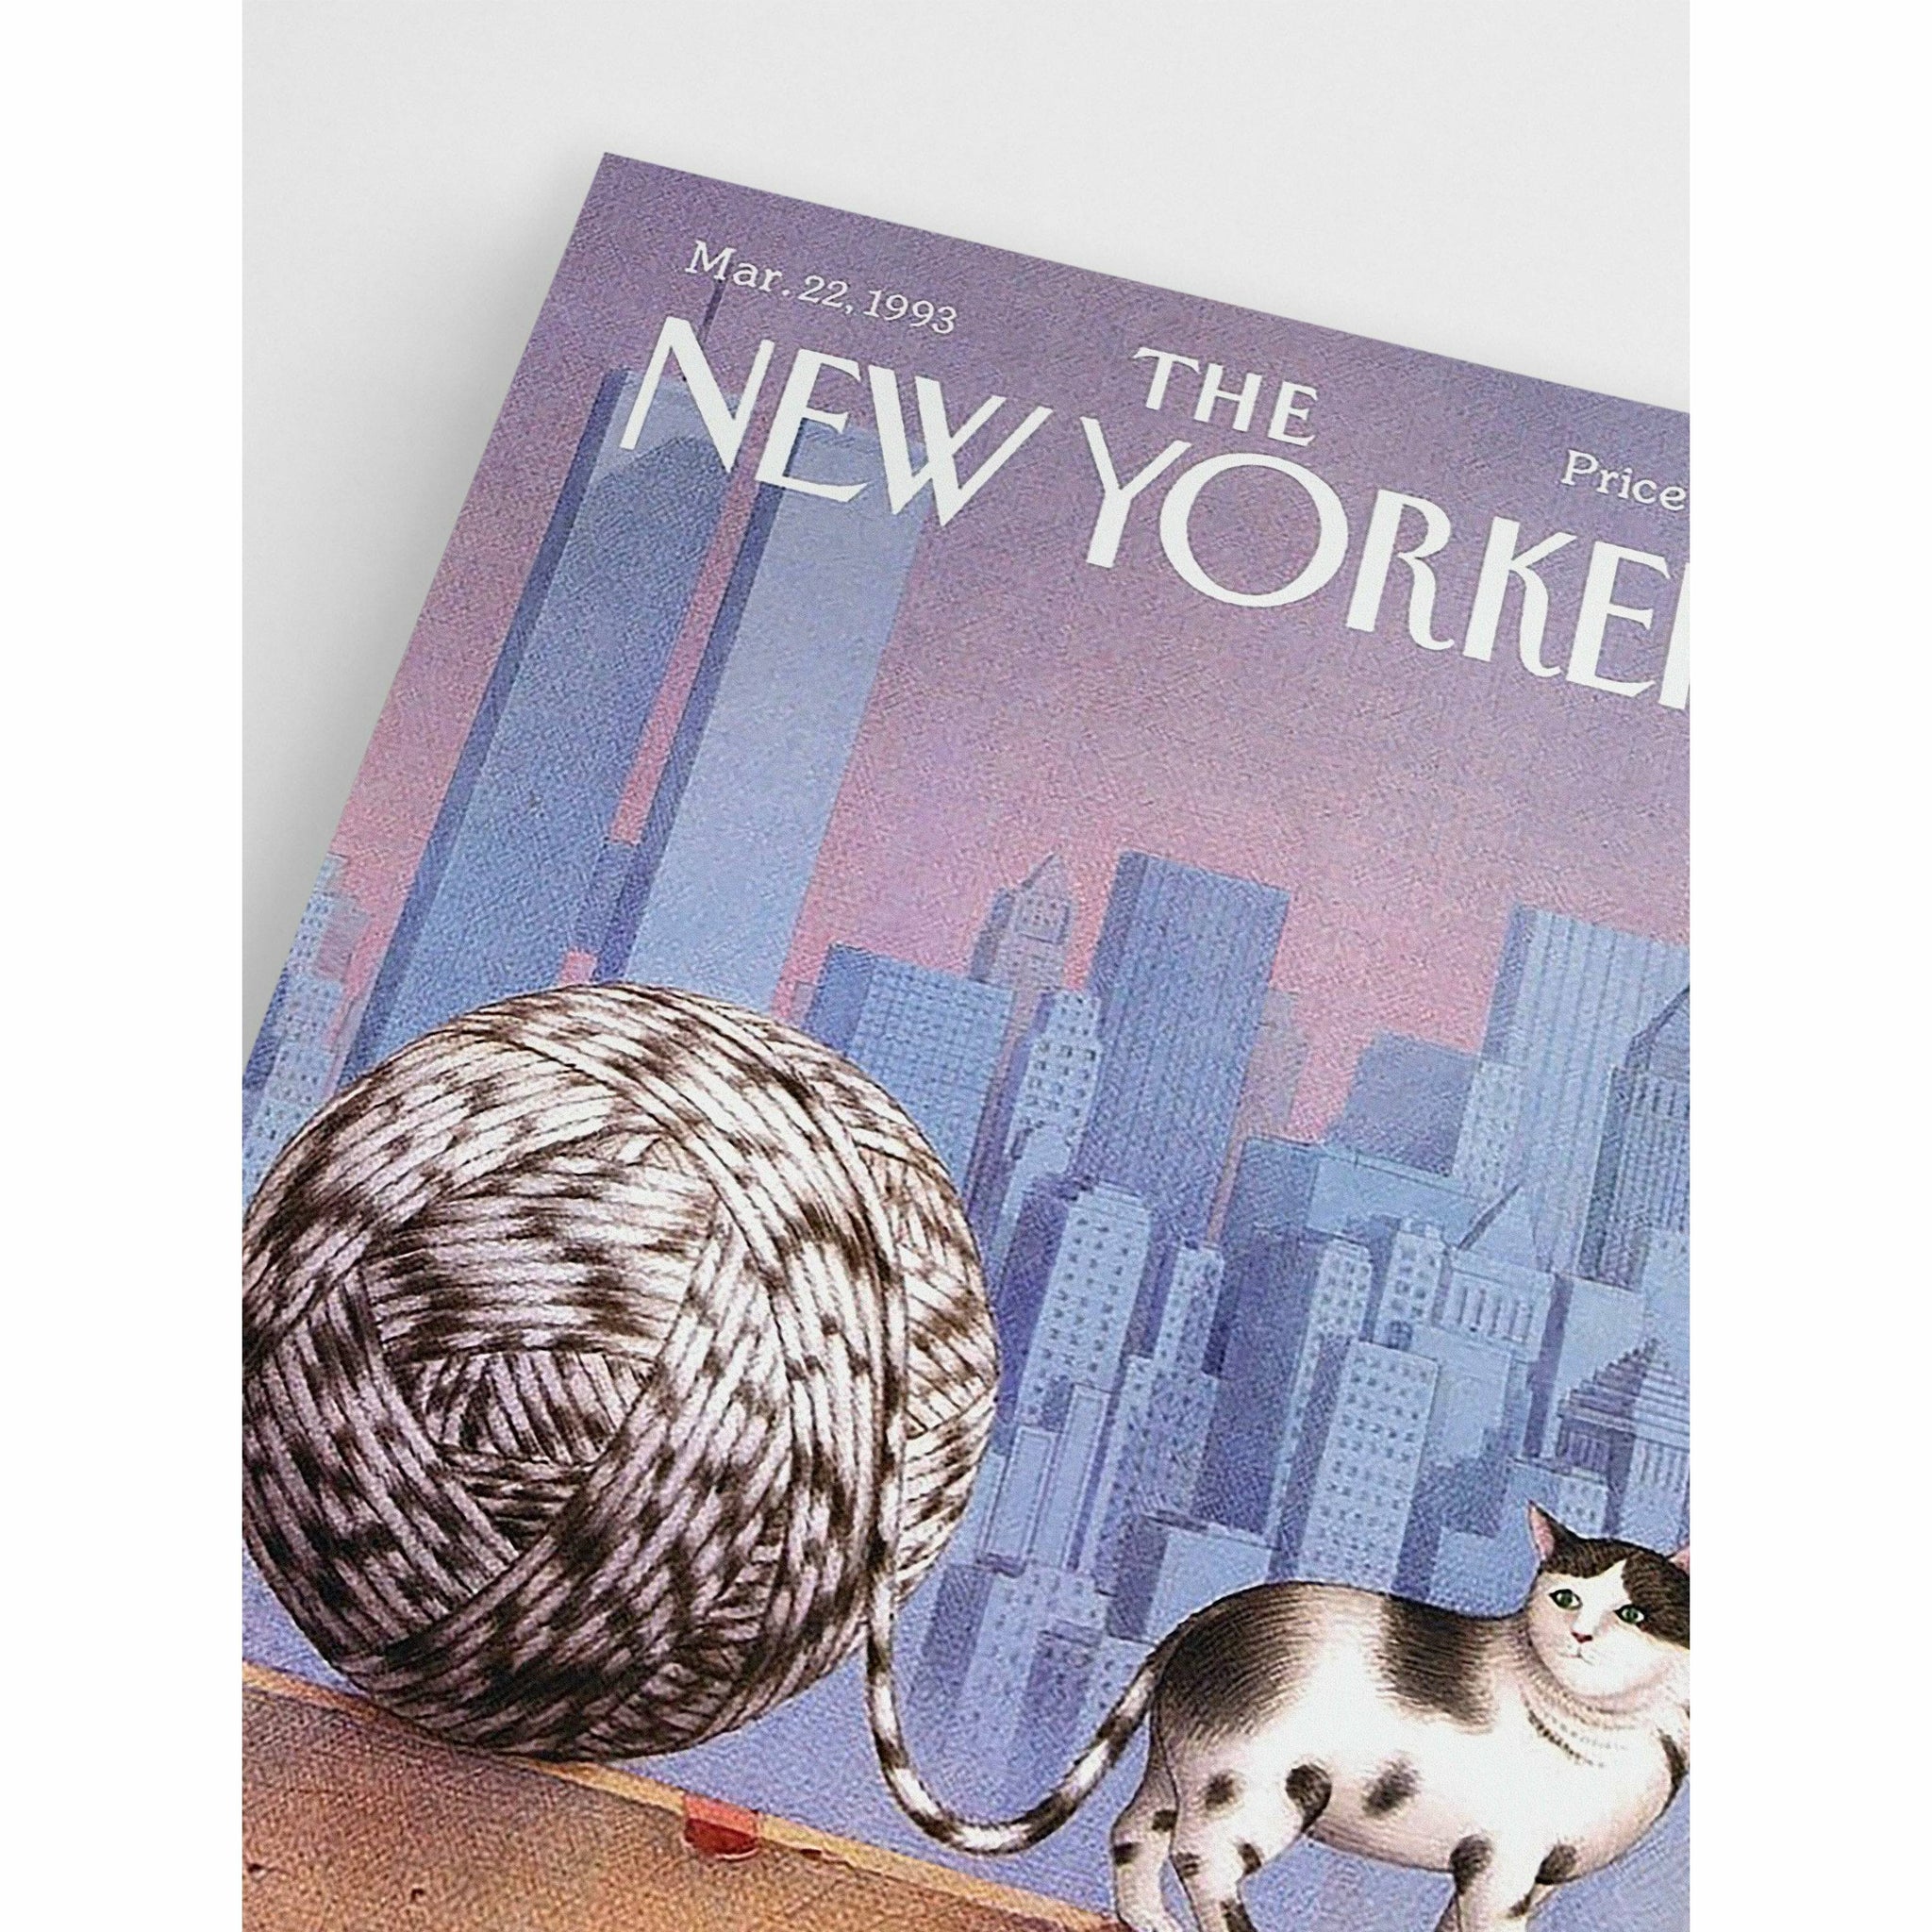 The New Yorker Mar 22, 1993 Poster